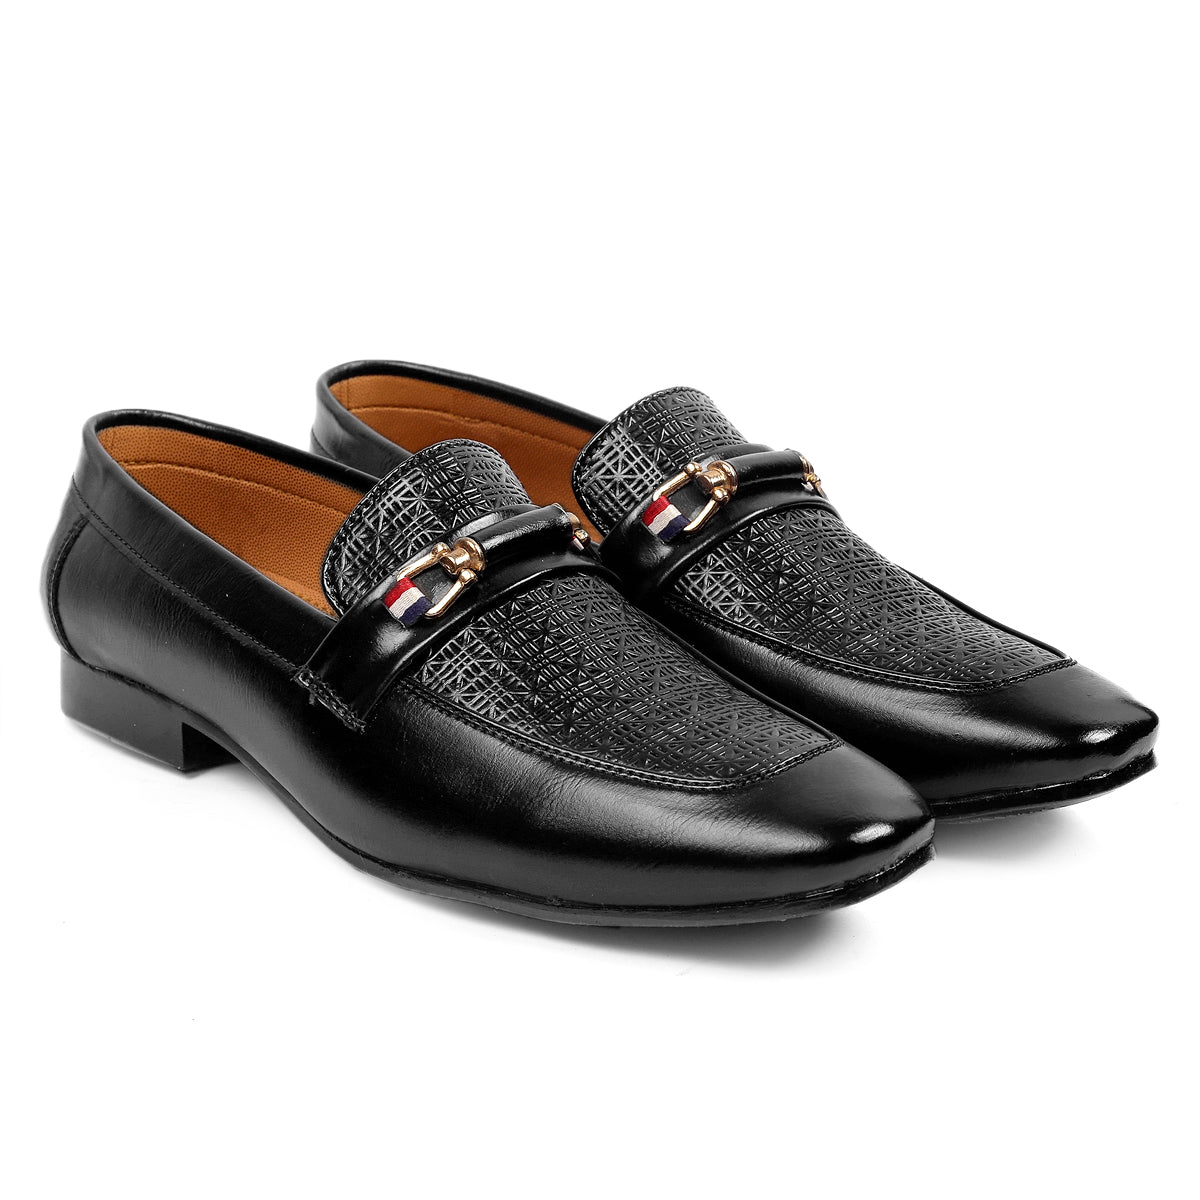 BXXY Men's Party Wear Casual Moccasins Slip-ons